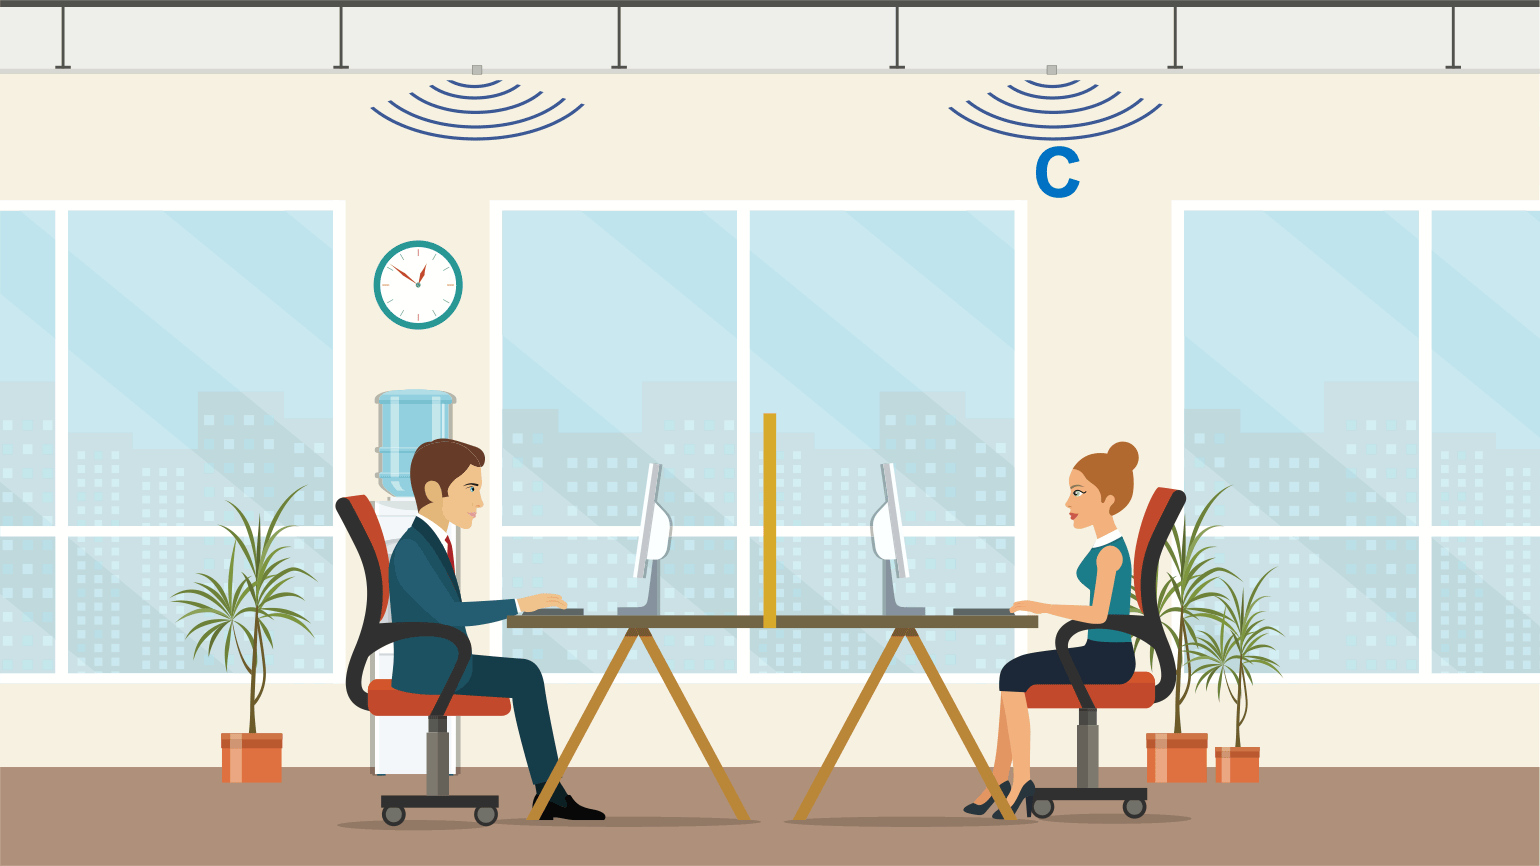 Illustration of coworkers sitting at facing desks, sound is masked by the addition of white noise into the space from the ceiling